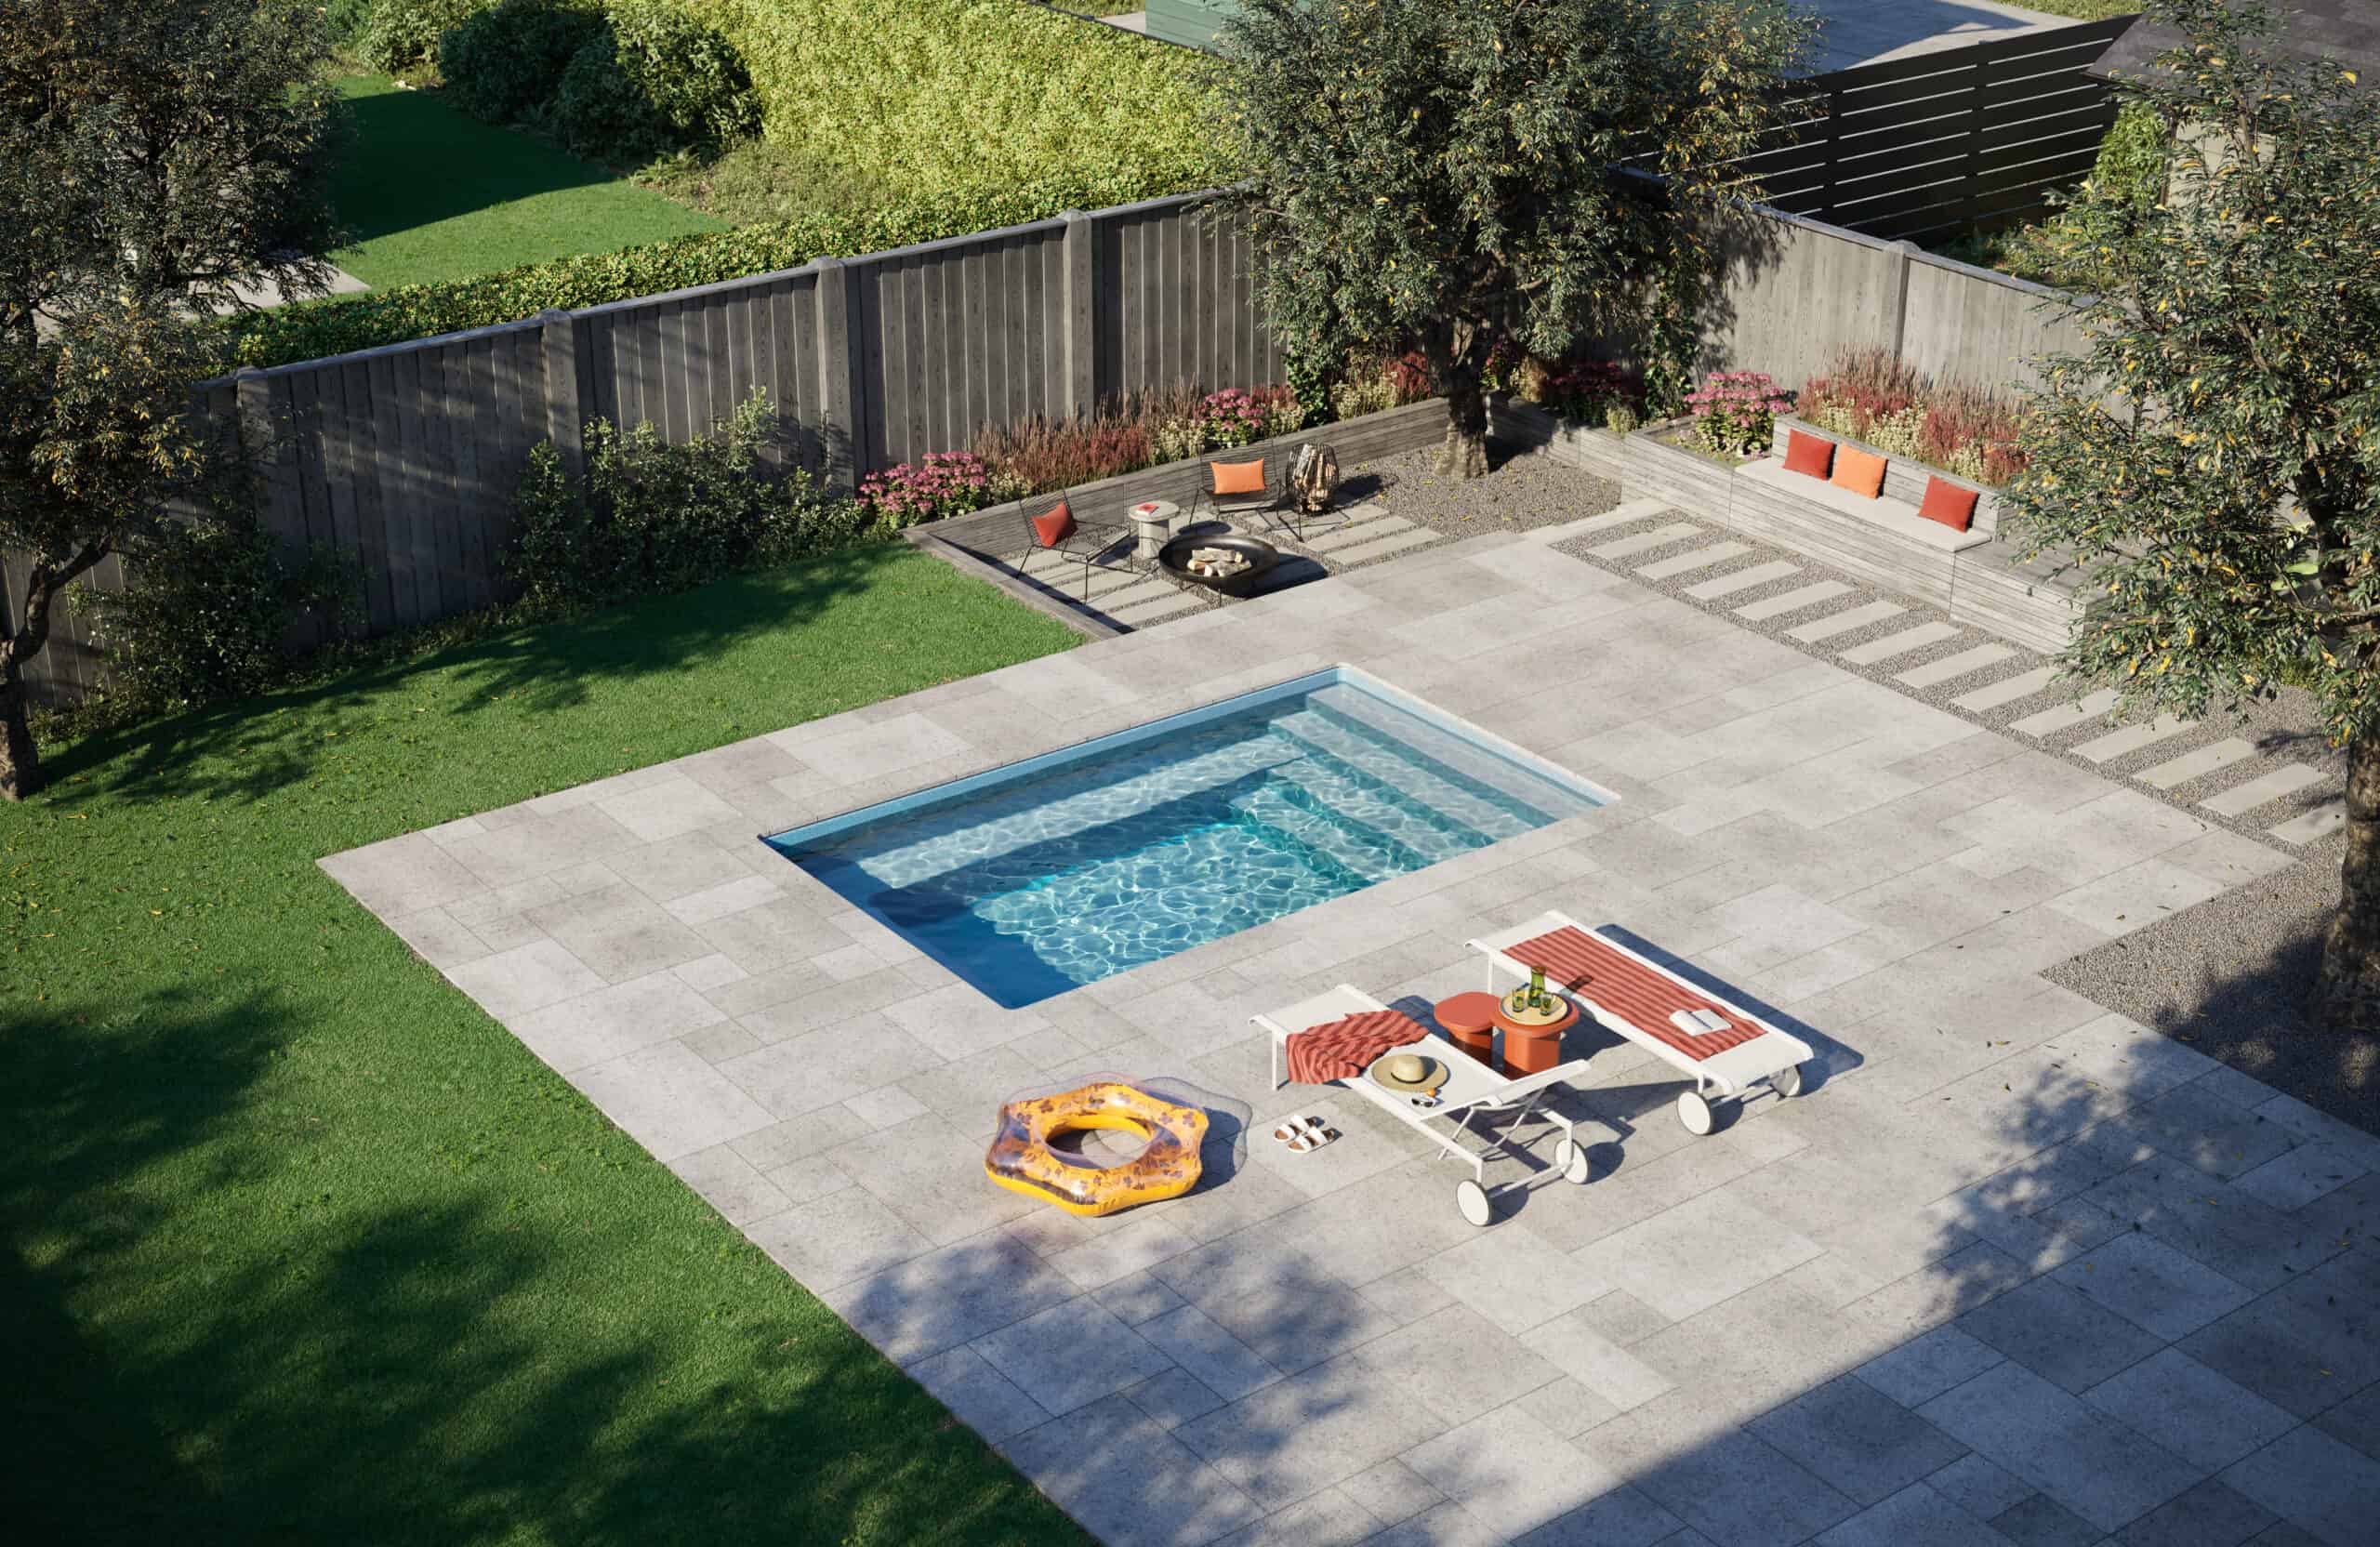 A rectangular swimming pool can be seen in a backyard. There is a stone patio surrounding the pool with some lounge chairs, towels, and pool float.